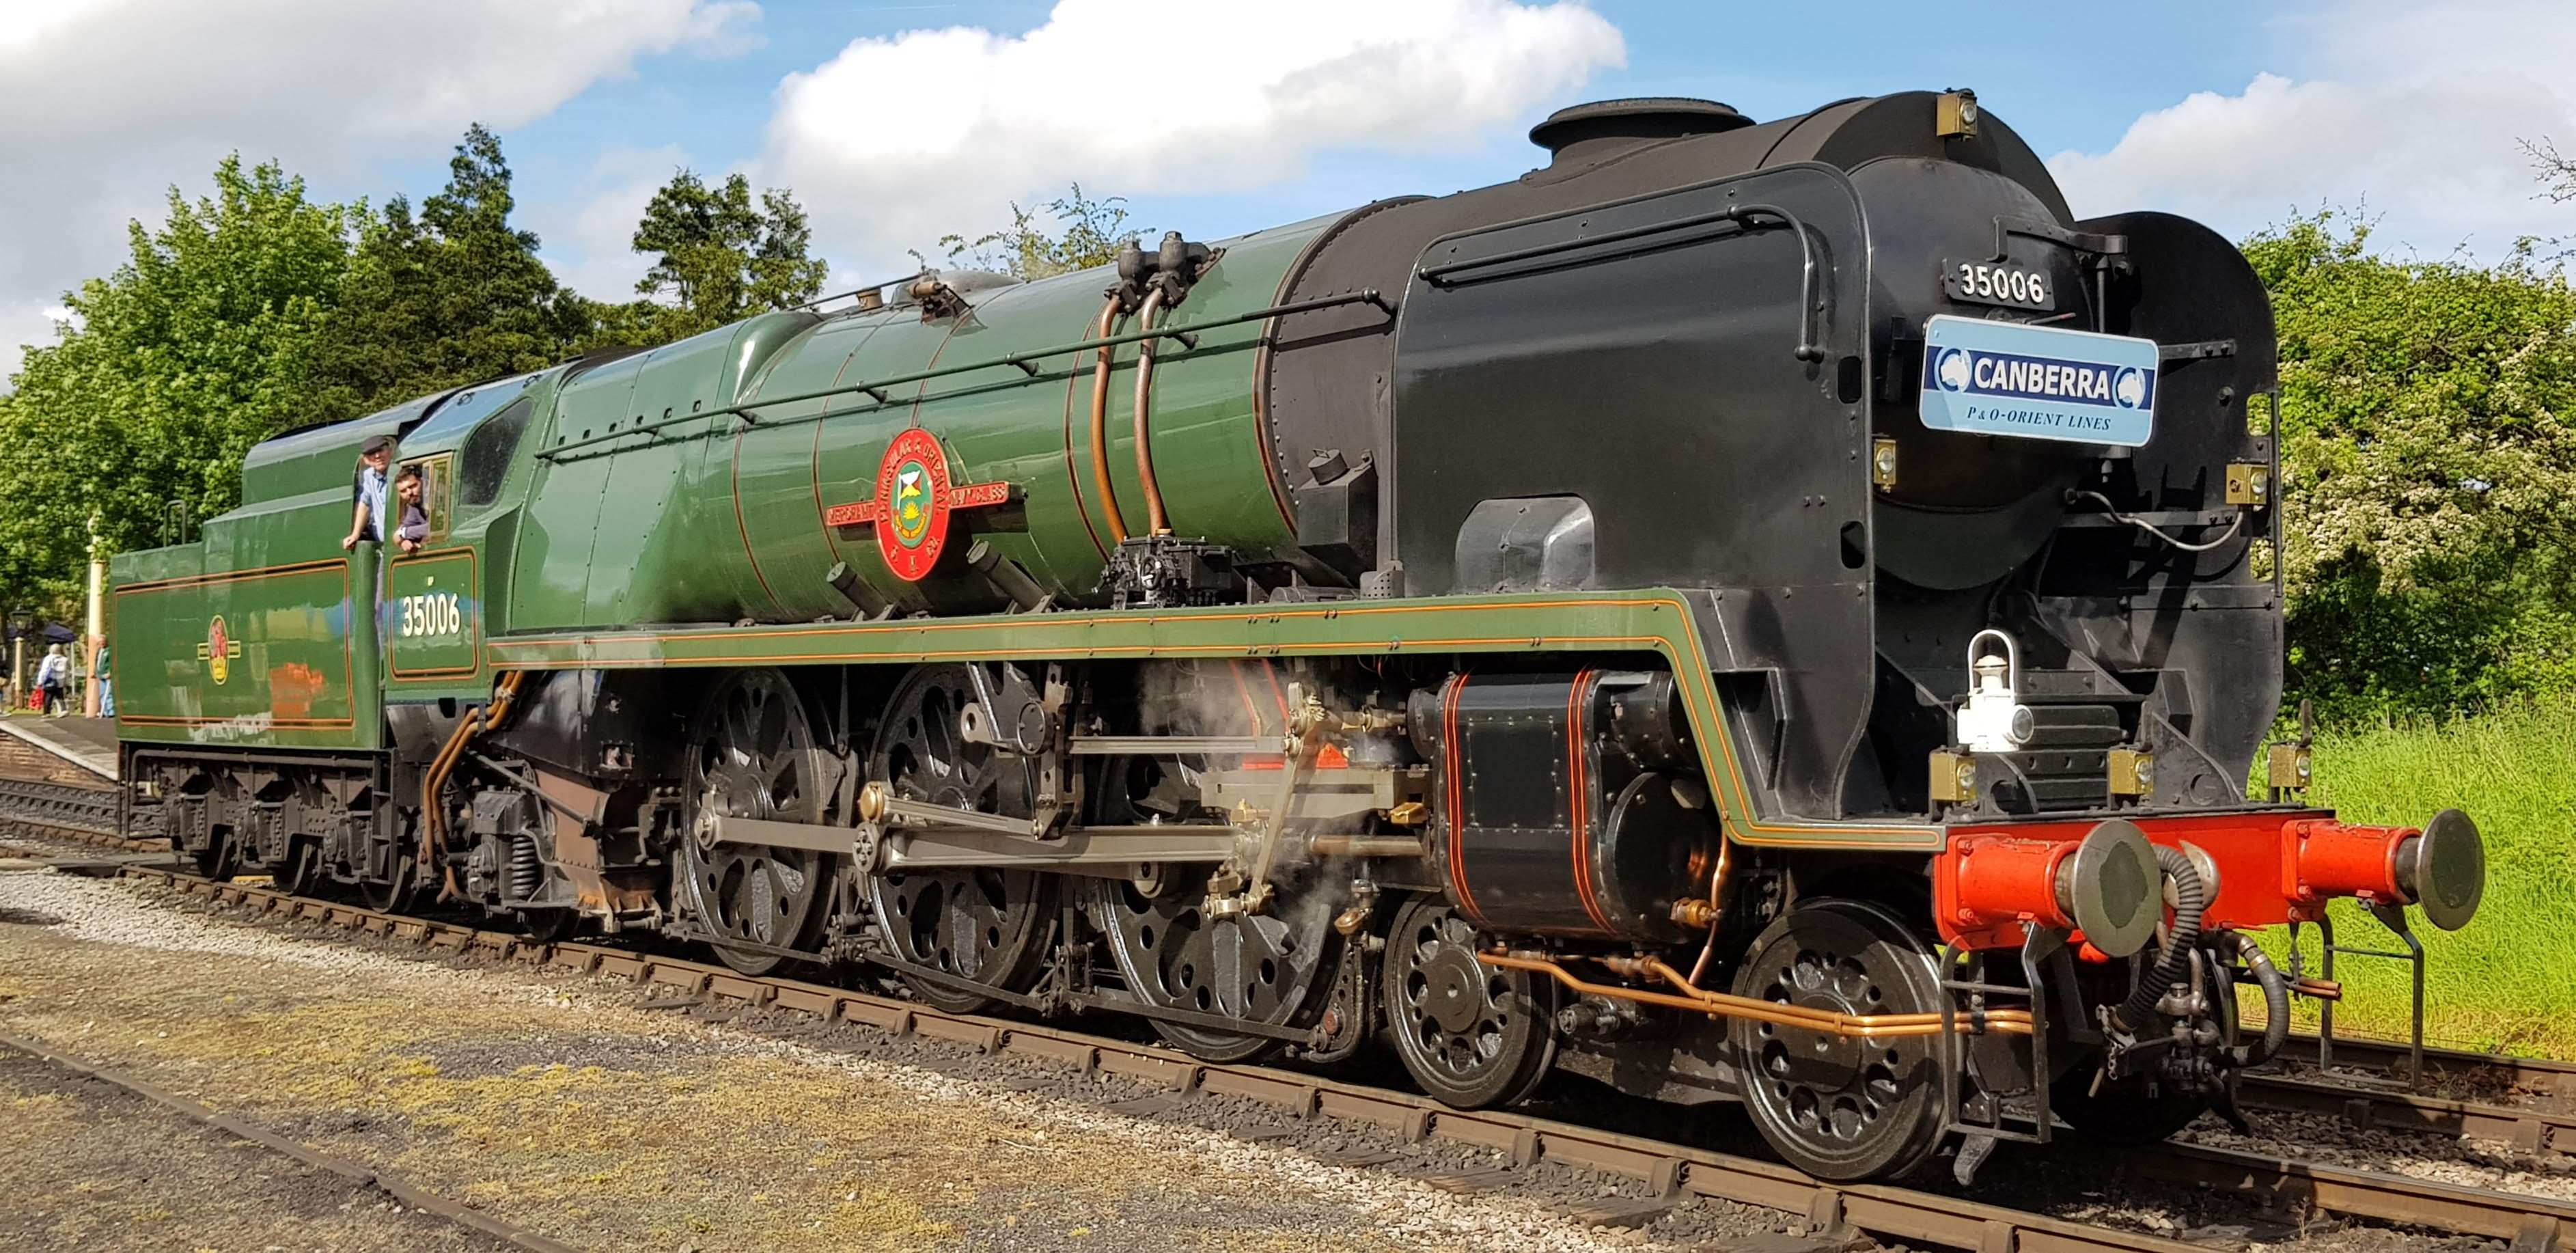 MacLellan Rubber – Suppliers of Rubber Products to Heritage Railway Projects 